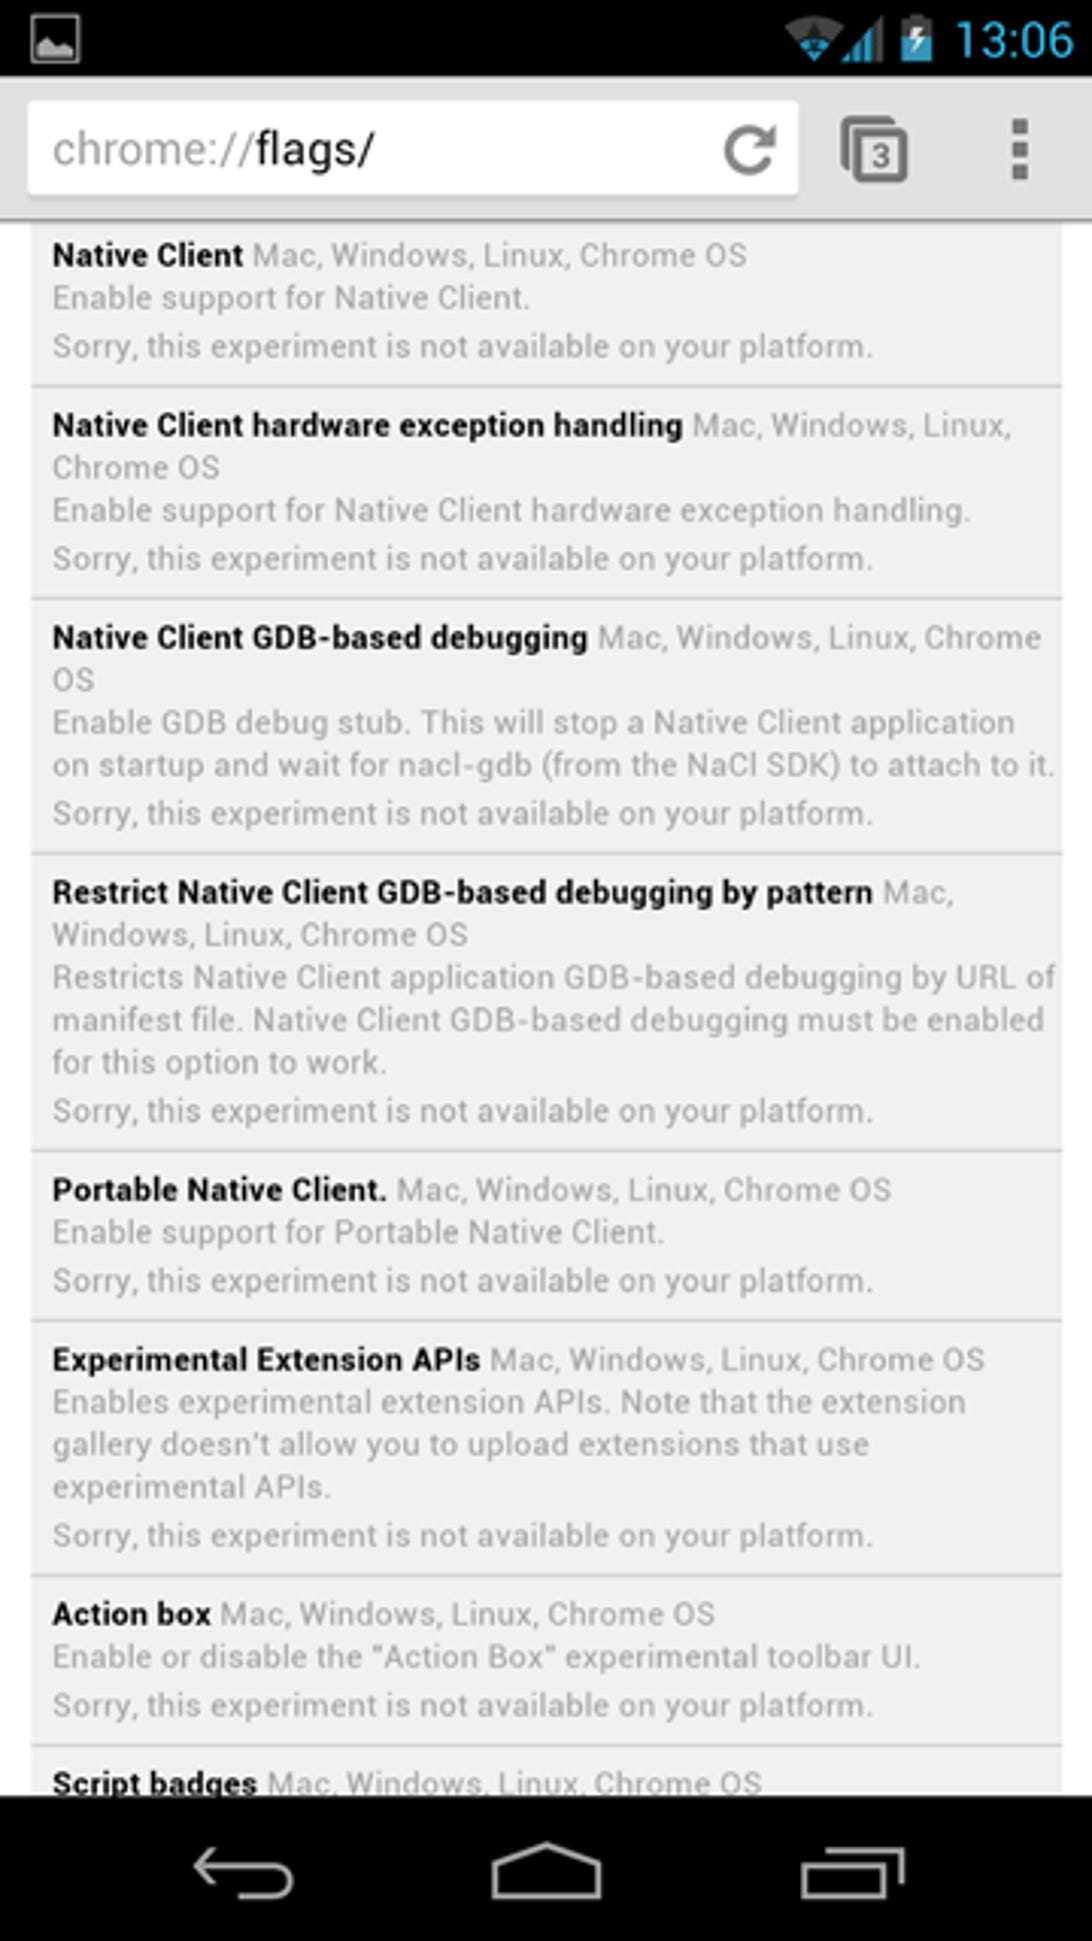 Not yet available for Chrome on Android: Native Client.